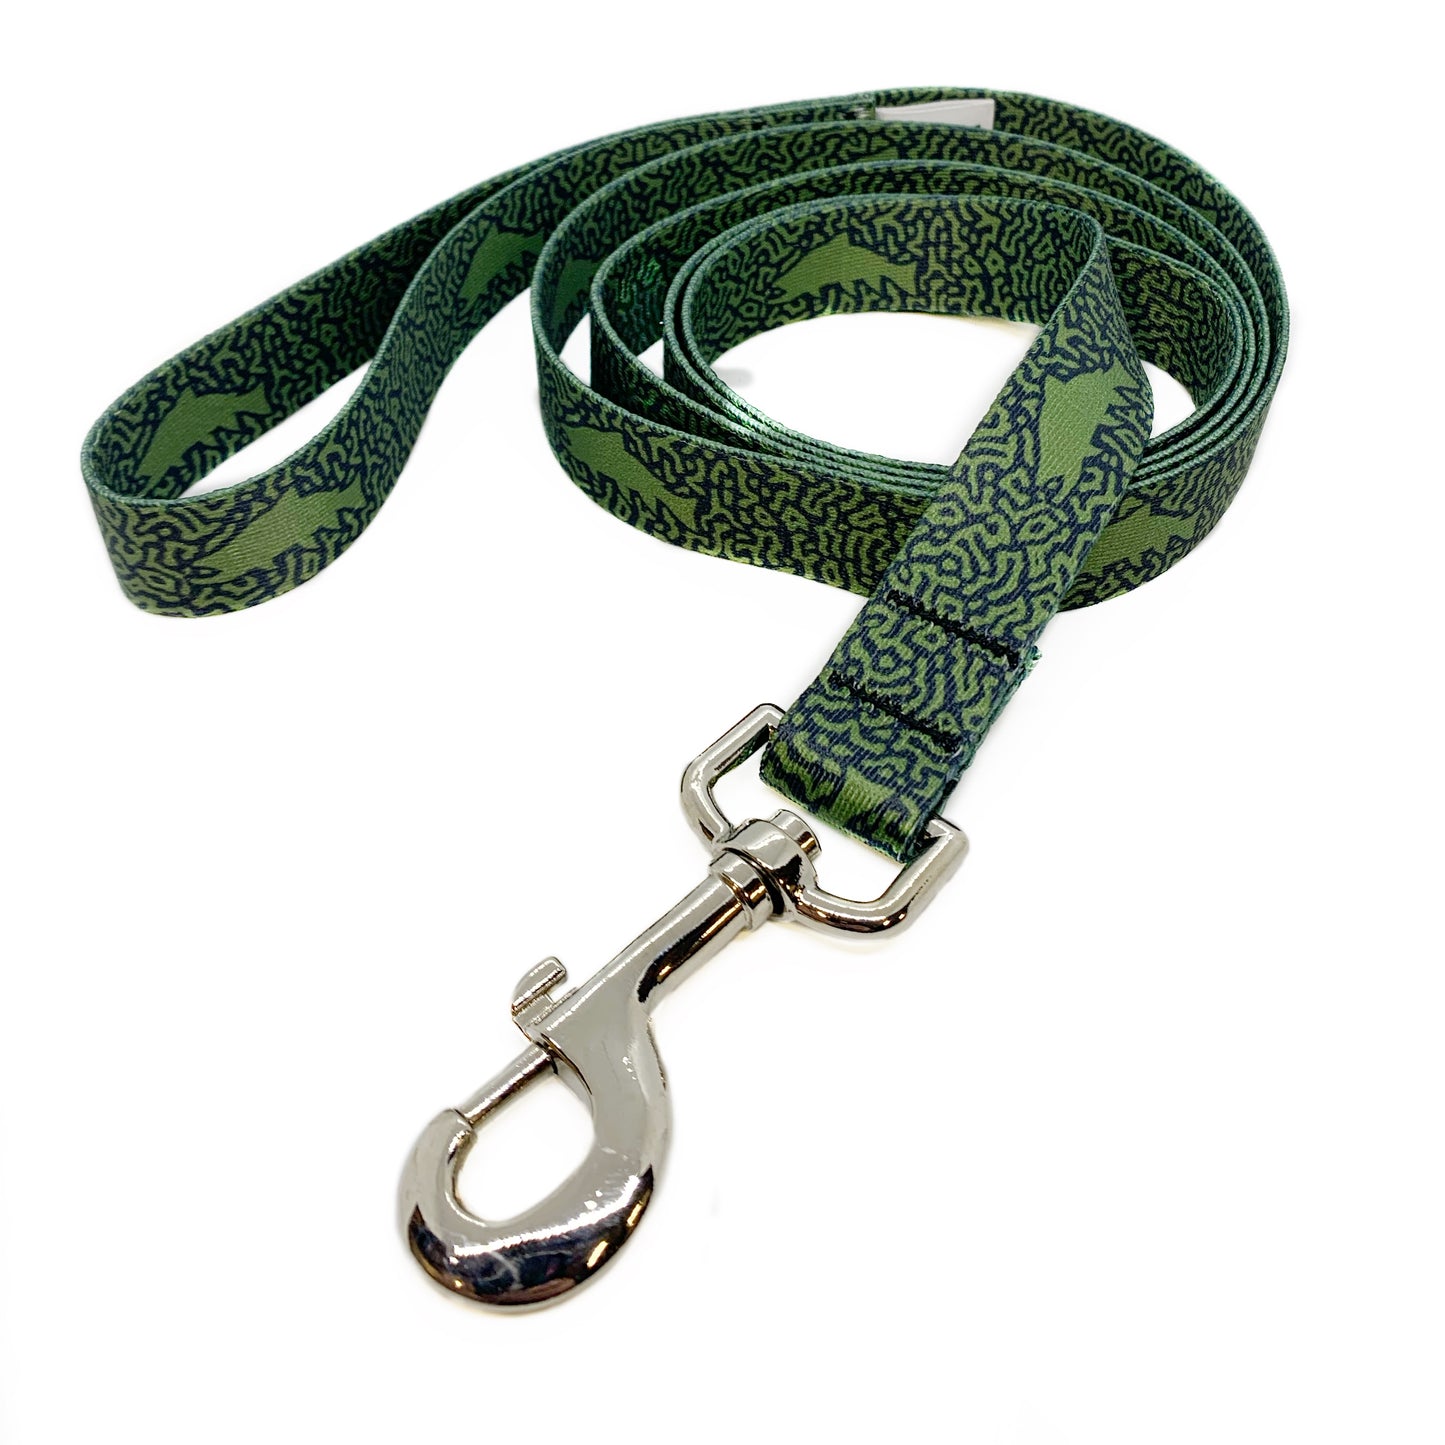 A navy nylon dog leash is shown. A green fish pattern is printed on it.